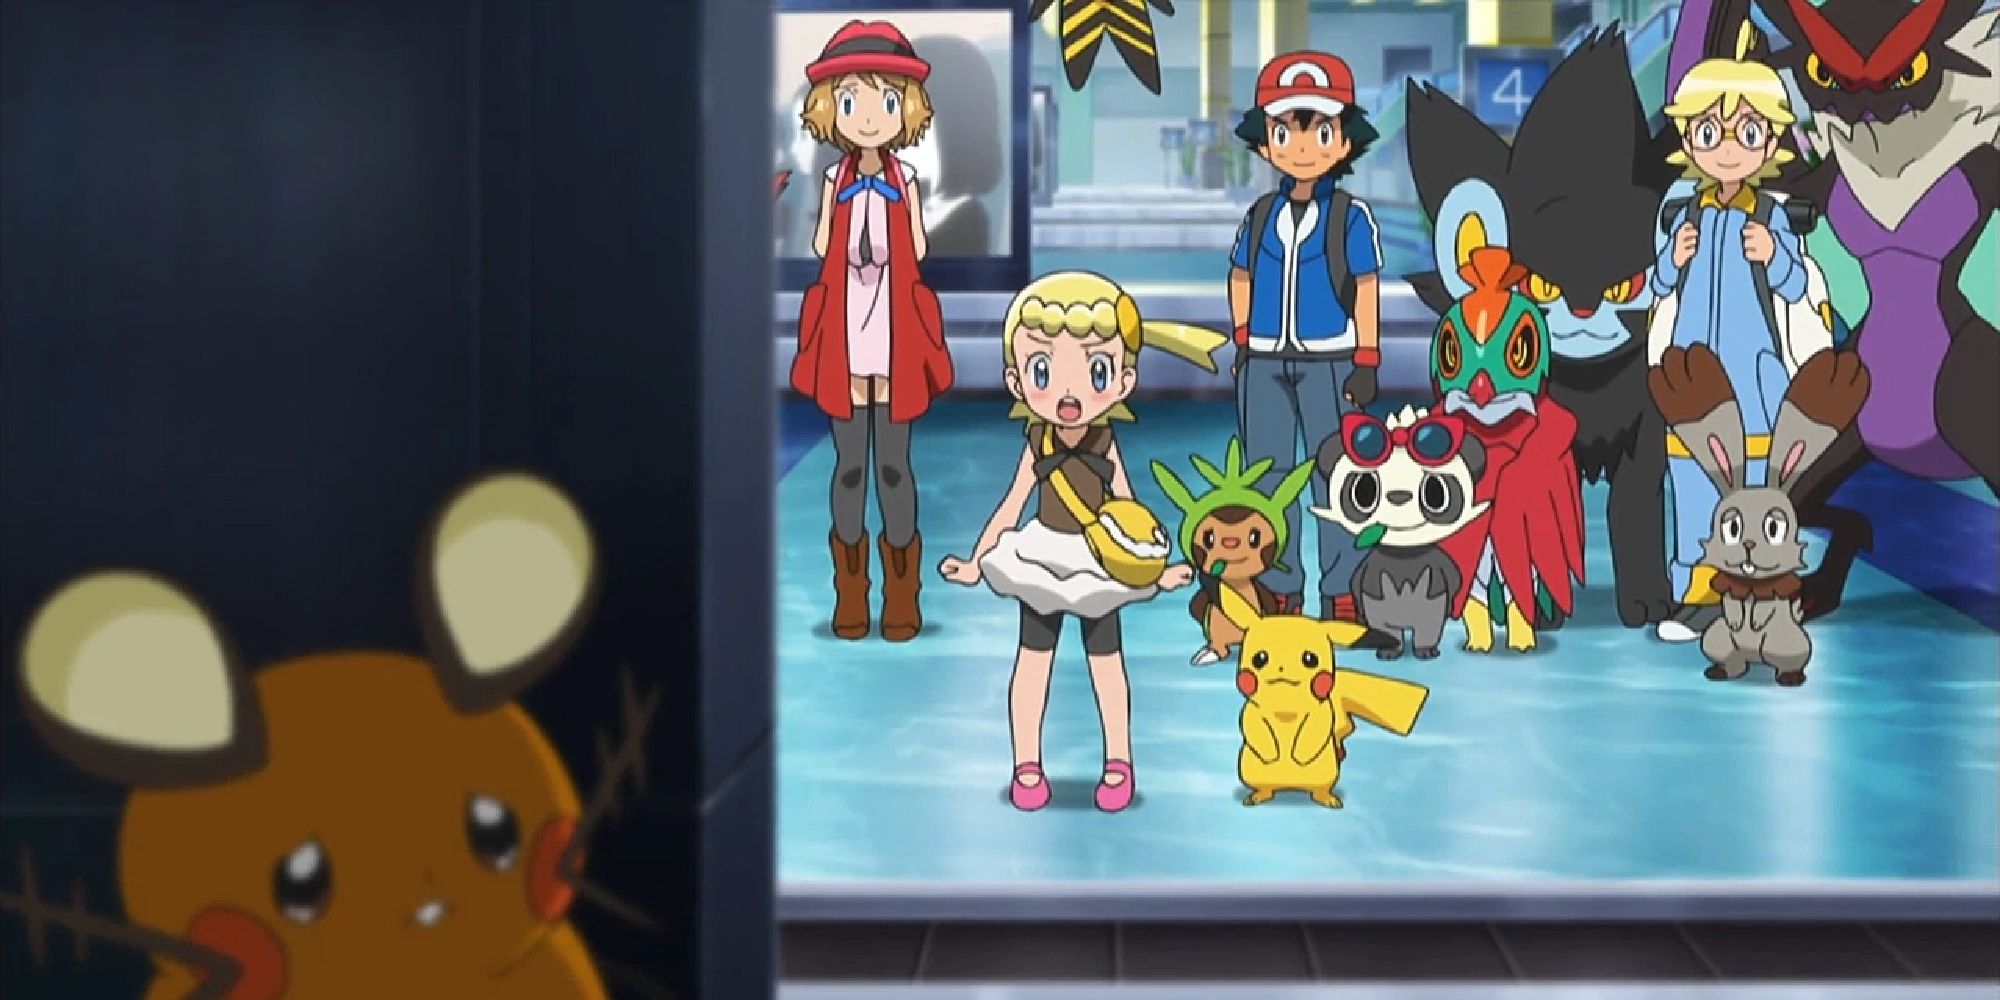 Serena, Bonnie, Ash, Clemont, and their Pokemon coaxing Dedenne out of hiding